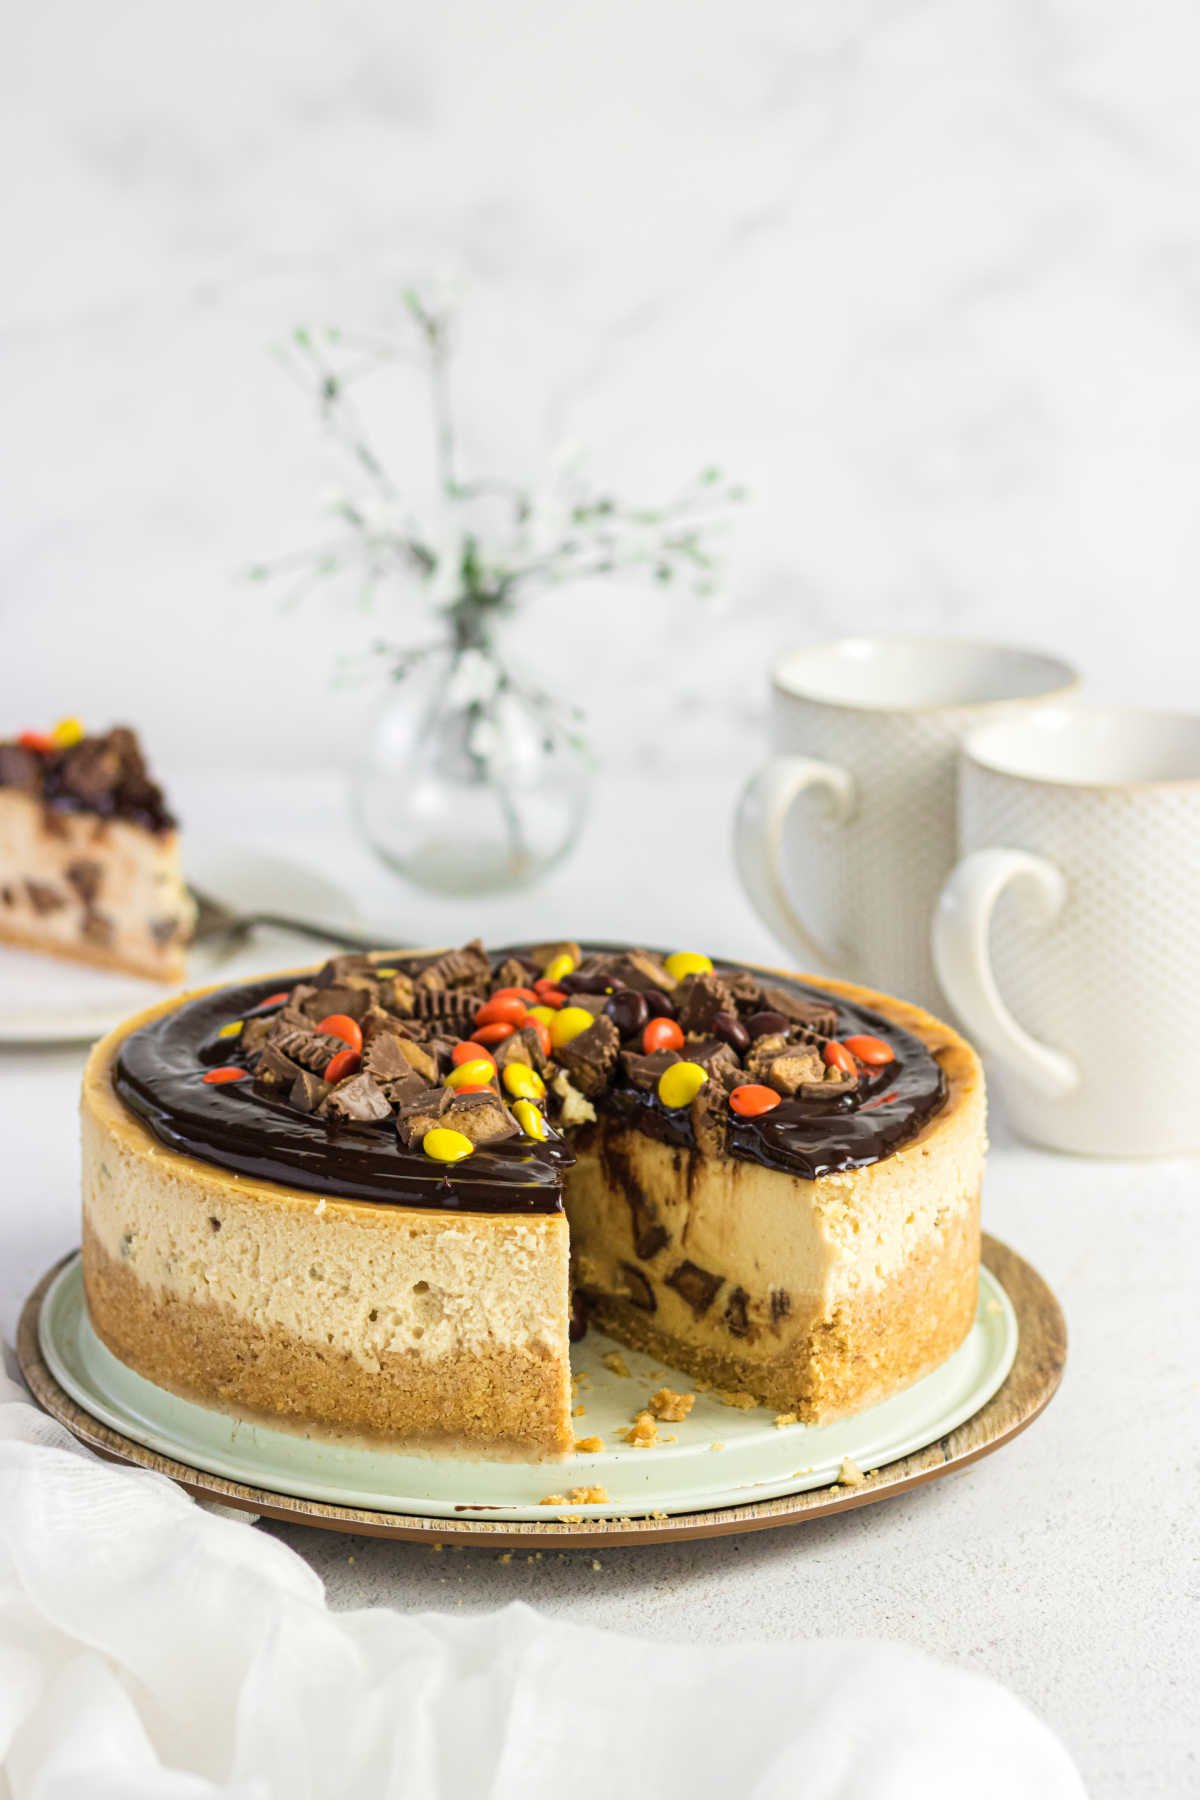 Peanut butter cup cheesecake with a slice removed.